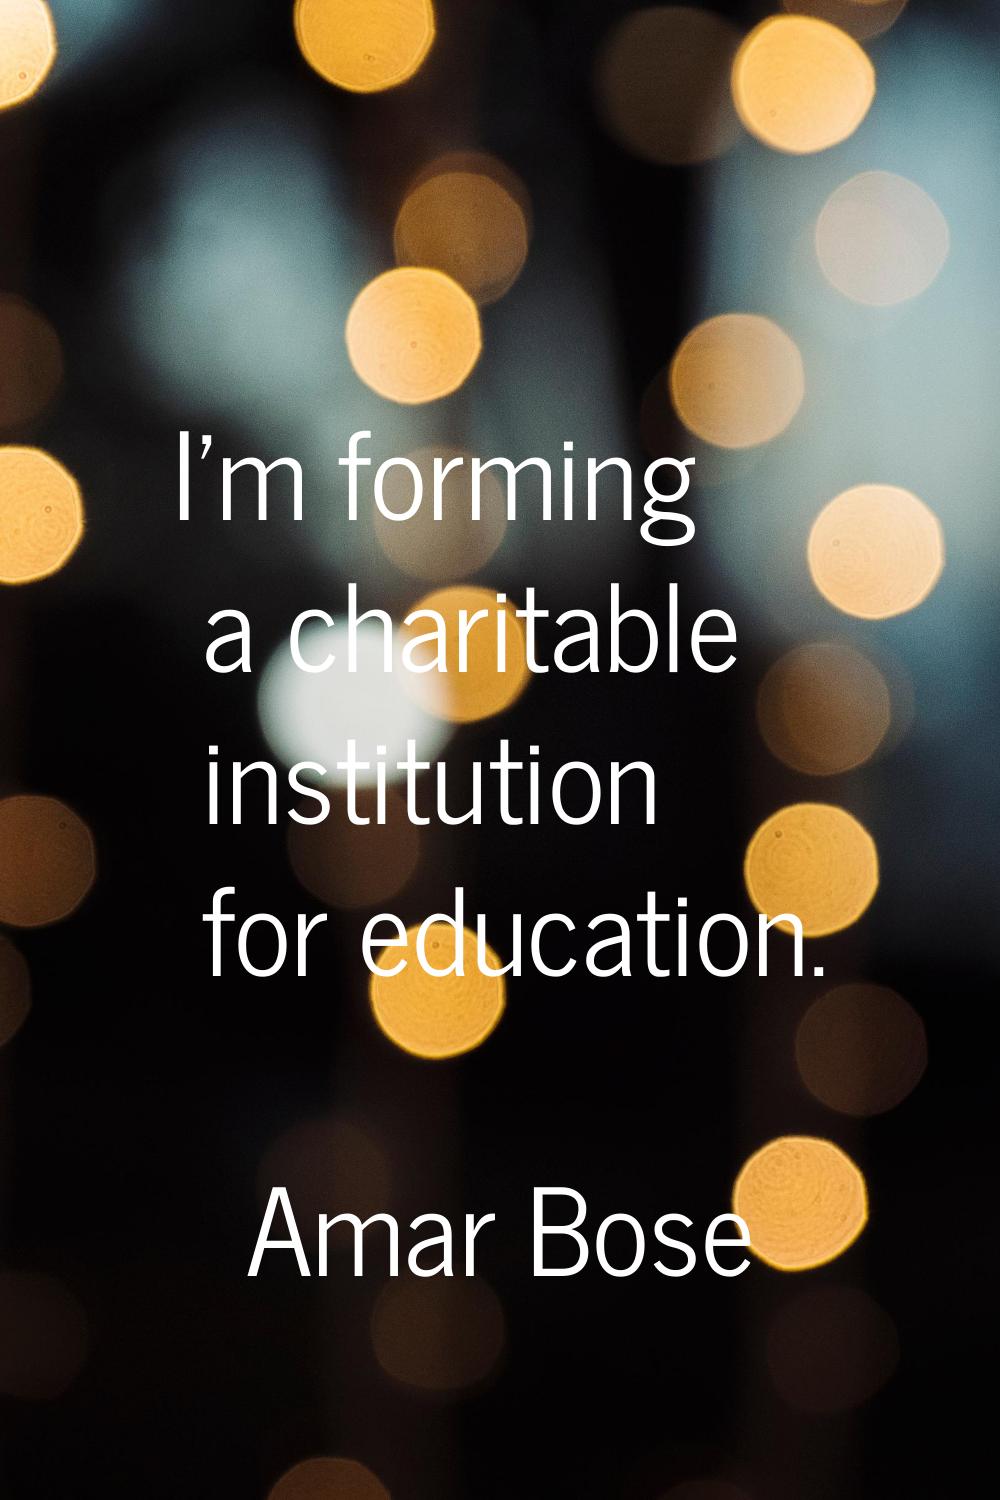 I'm forming a charitable institution for education.